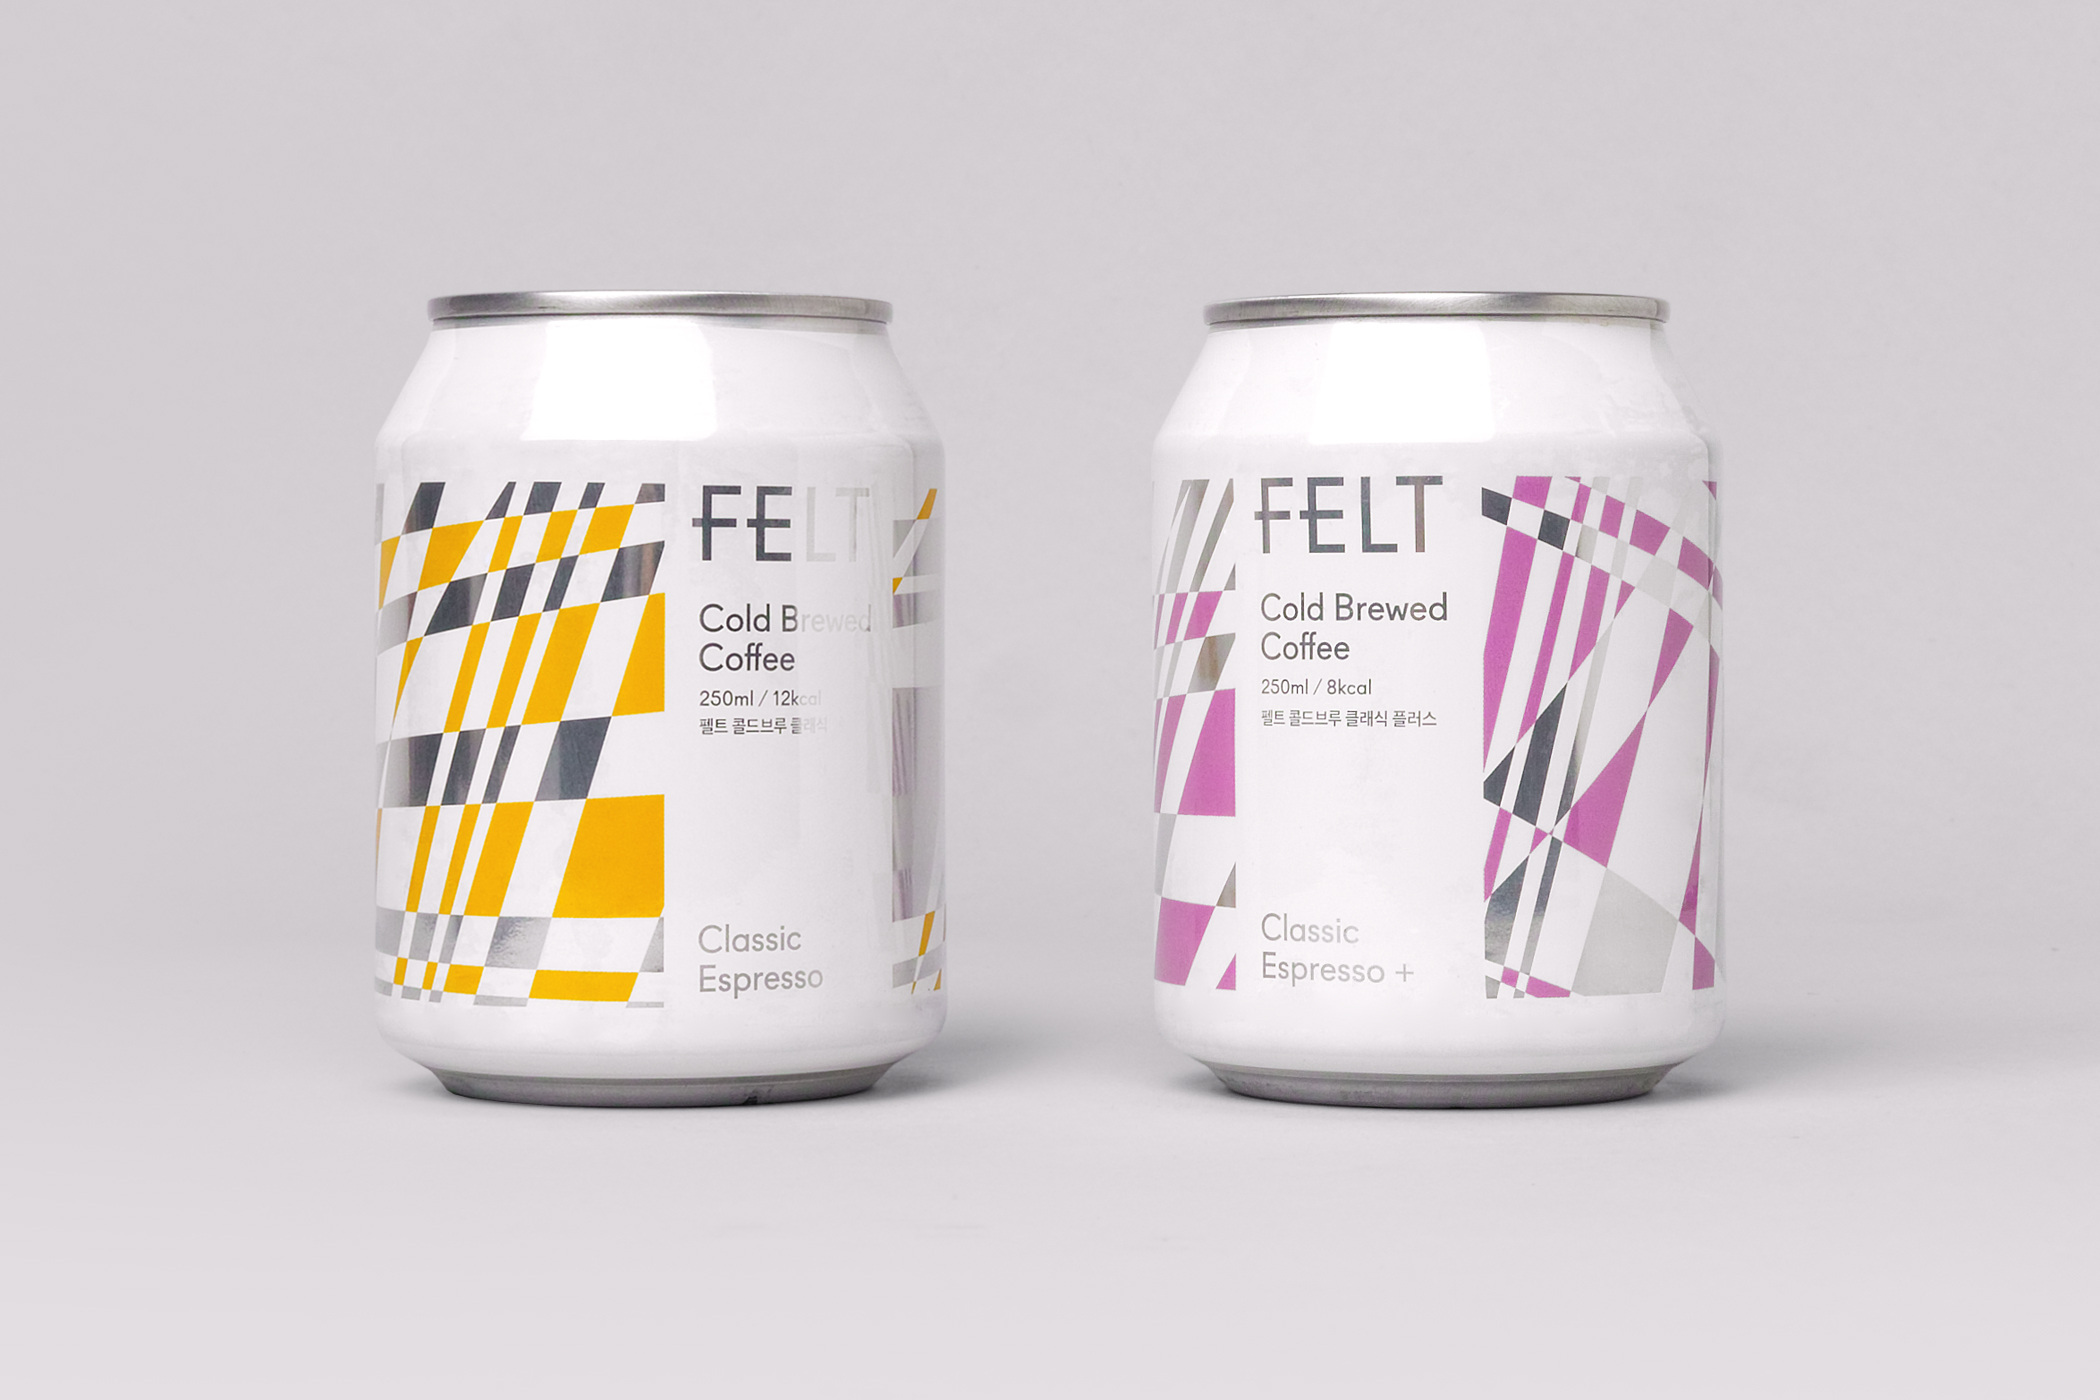 Logotype and packaging design by Studio fnt for South Korean coffee shop and coffee brand Felt